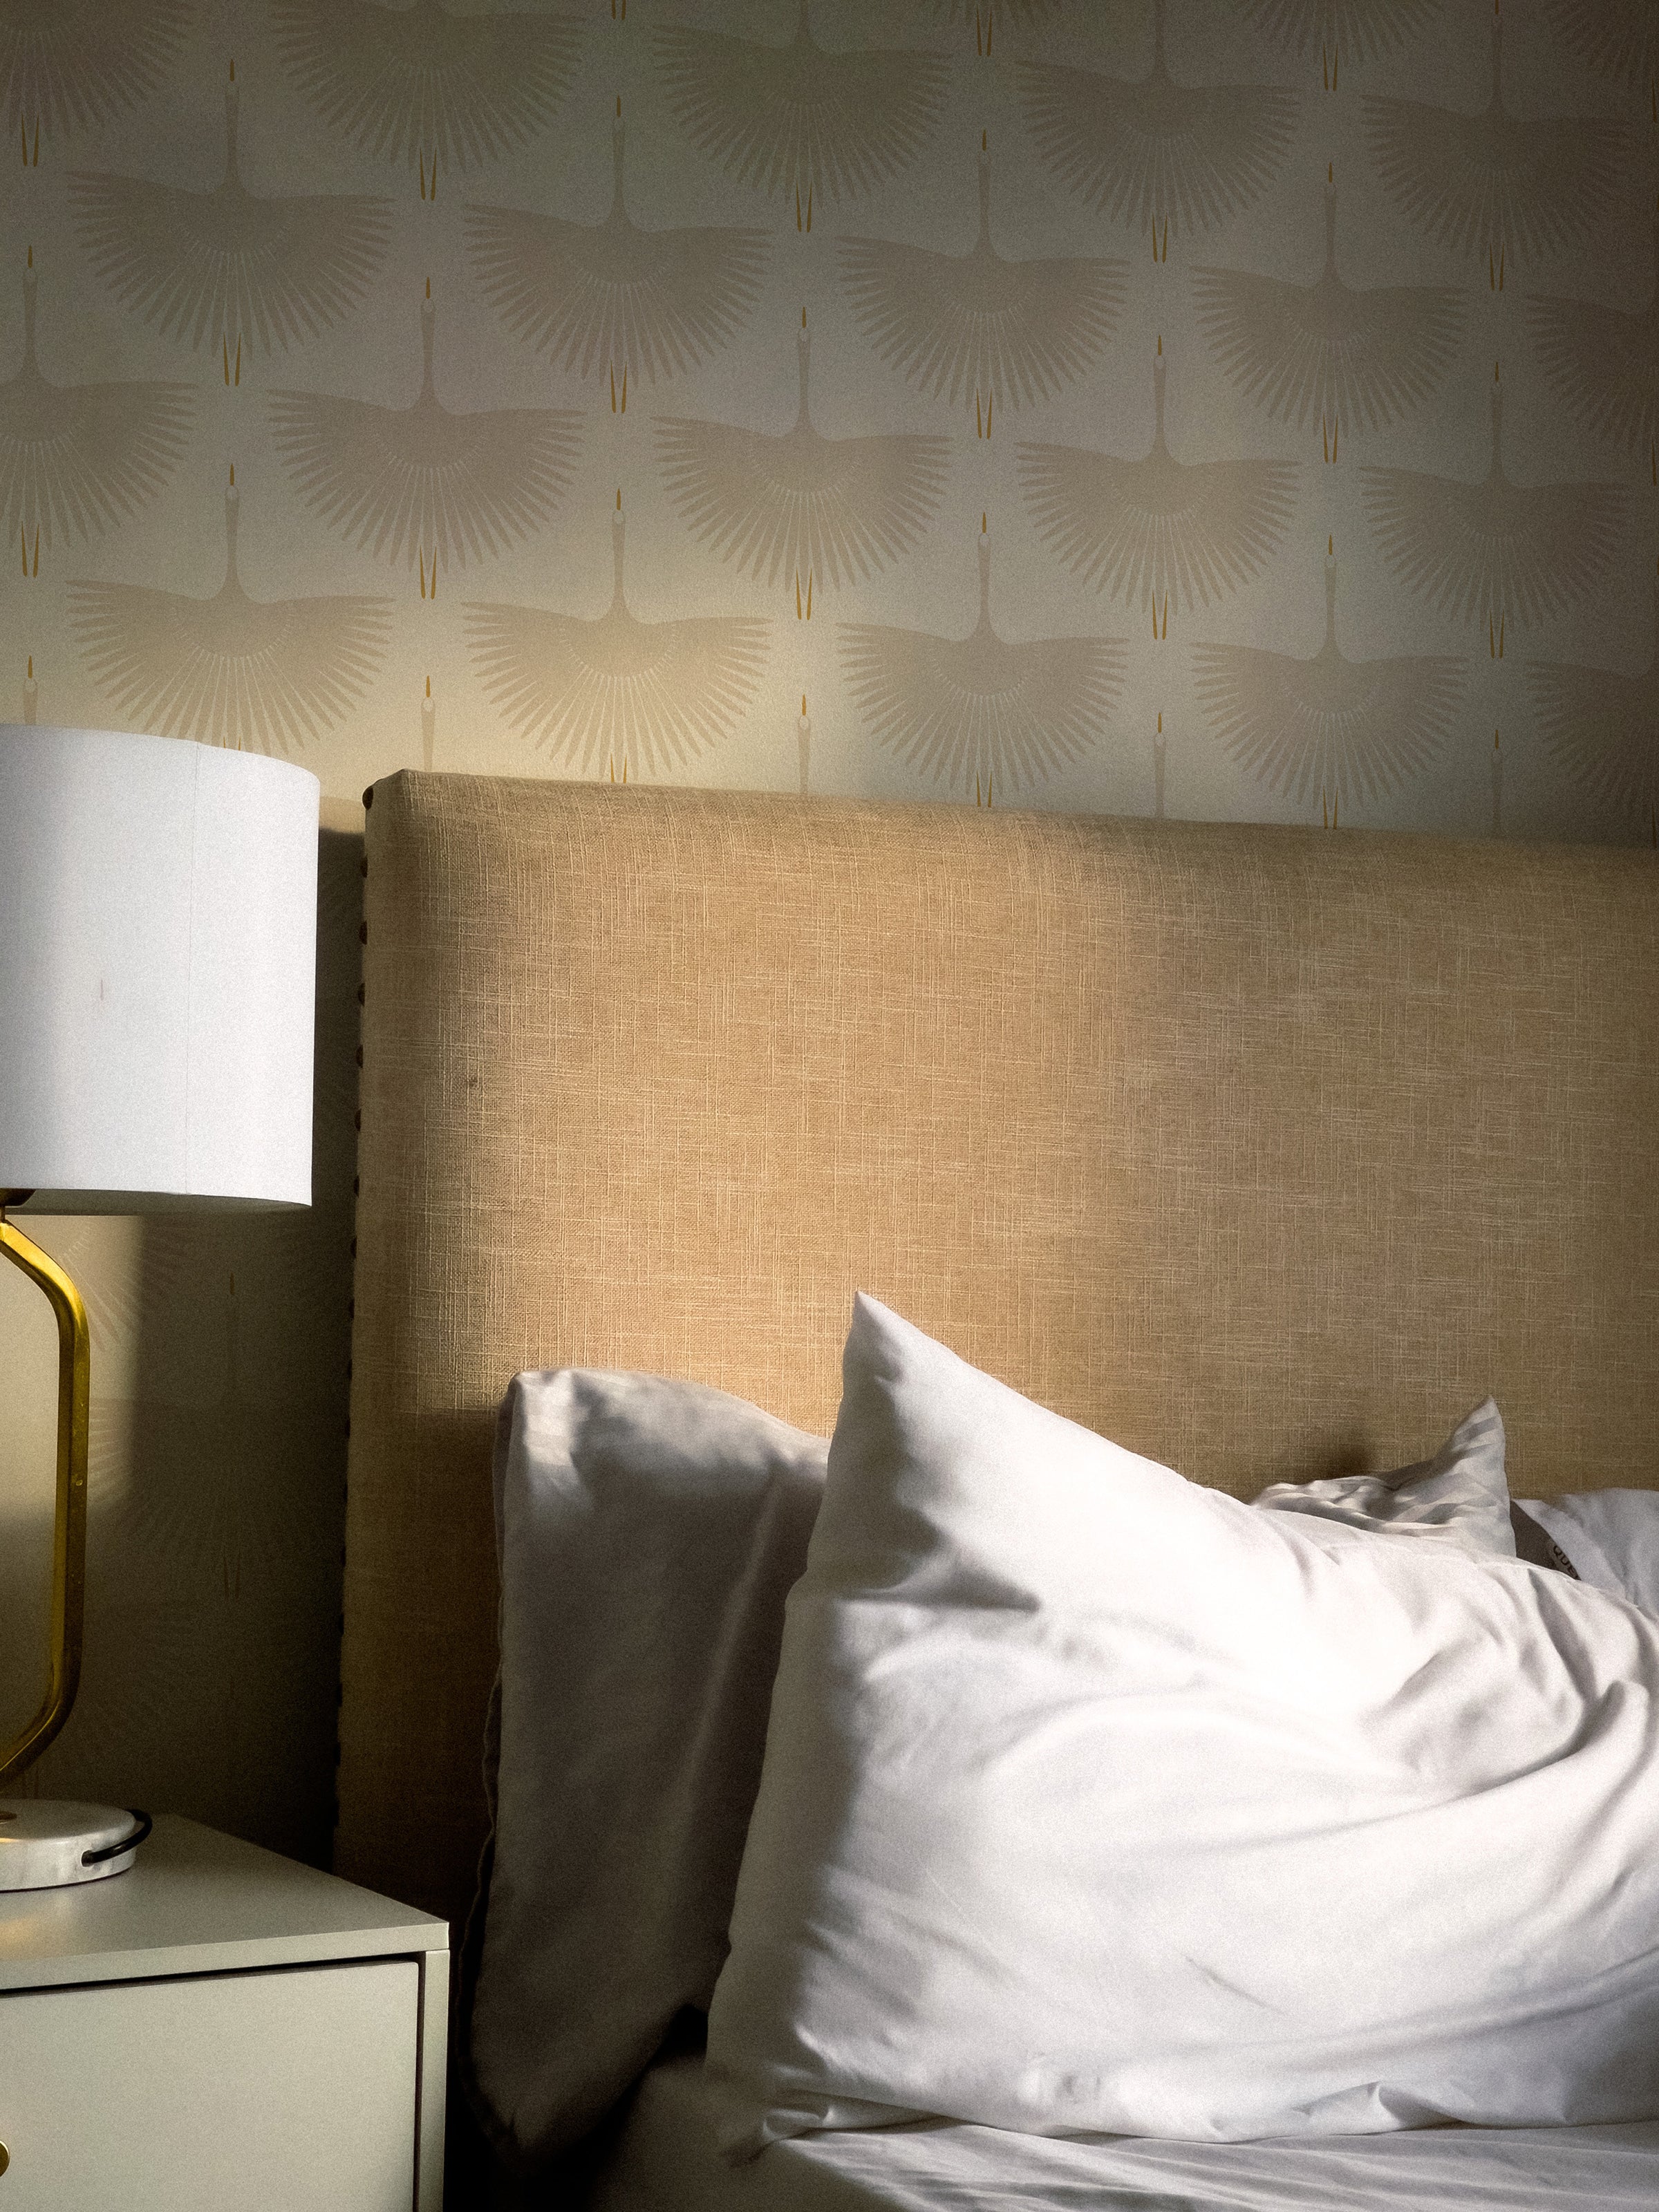 A bedroom scene illuminated by soft ambient lighting that highlights the "Flying Swans Wallpaper". This elegant wallpaper envelops the room where a bed with a simple headboard and white linen is present, creating a restful and stylish sleeping environment.